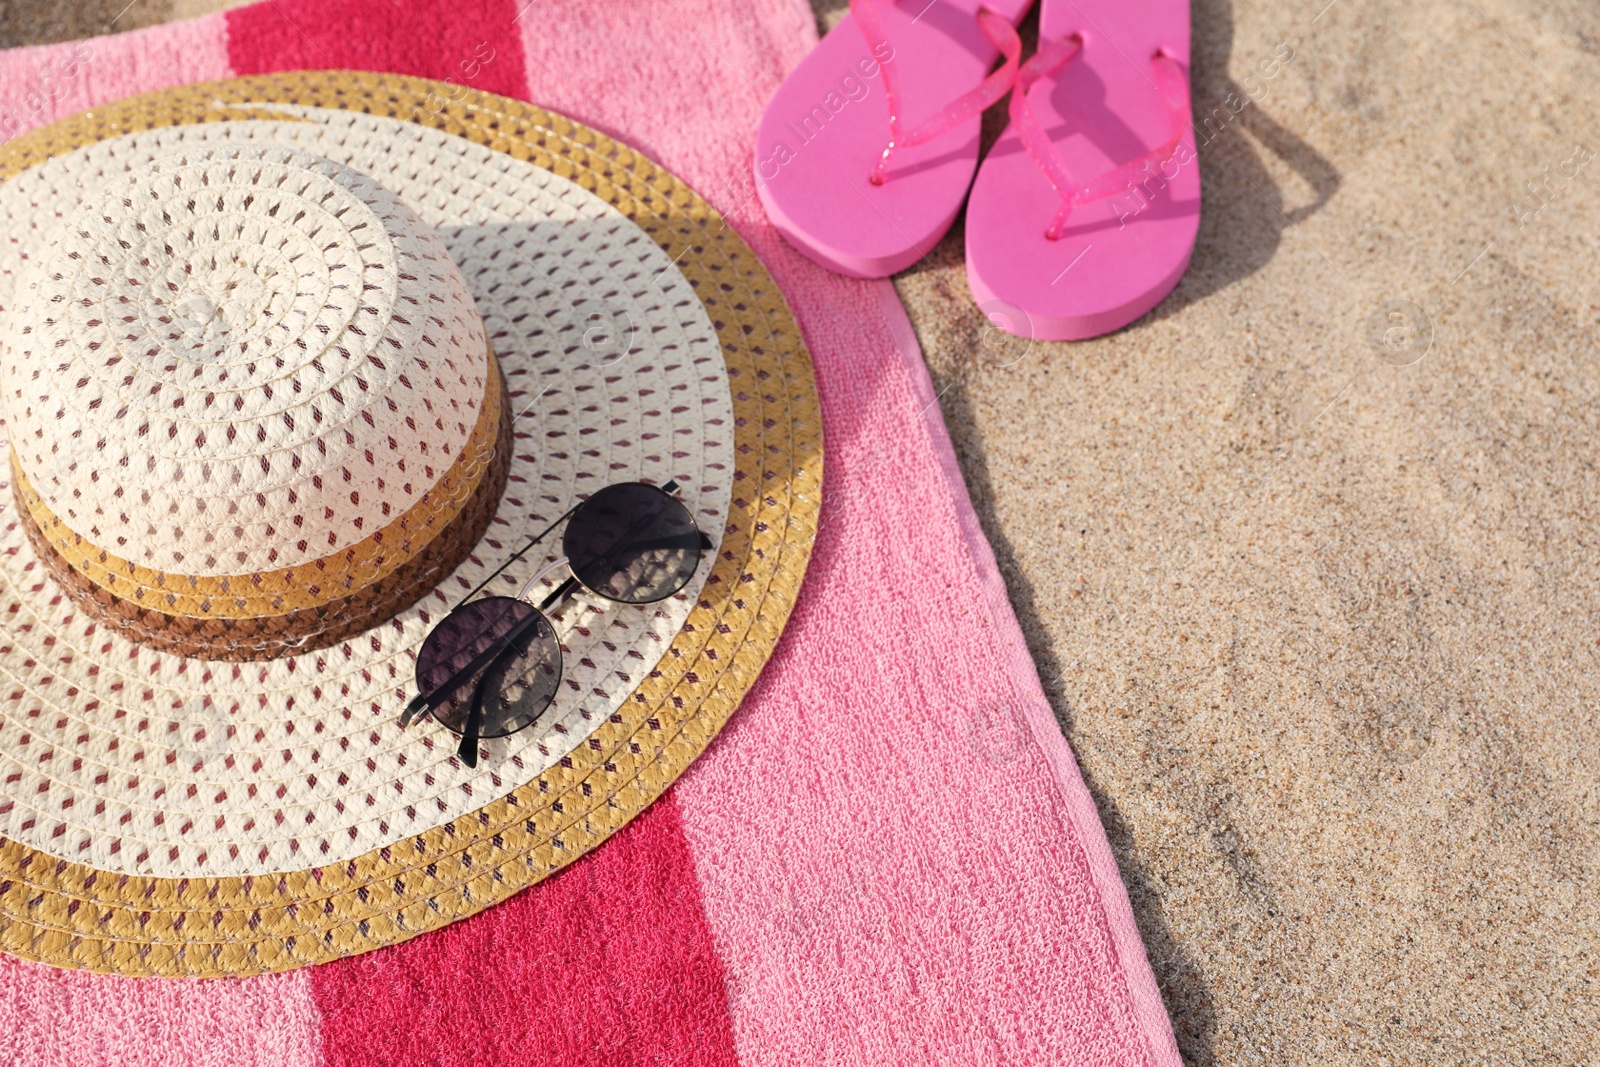 Photo of Beach towel with slippers, straw hat and sunglasses on sand